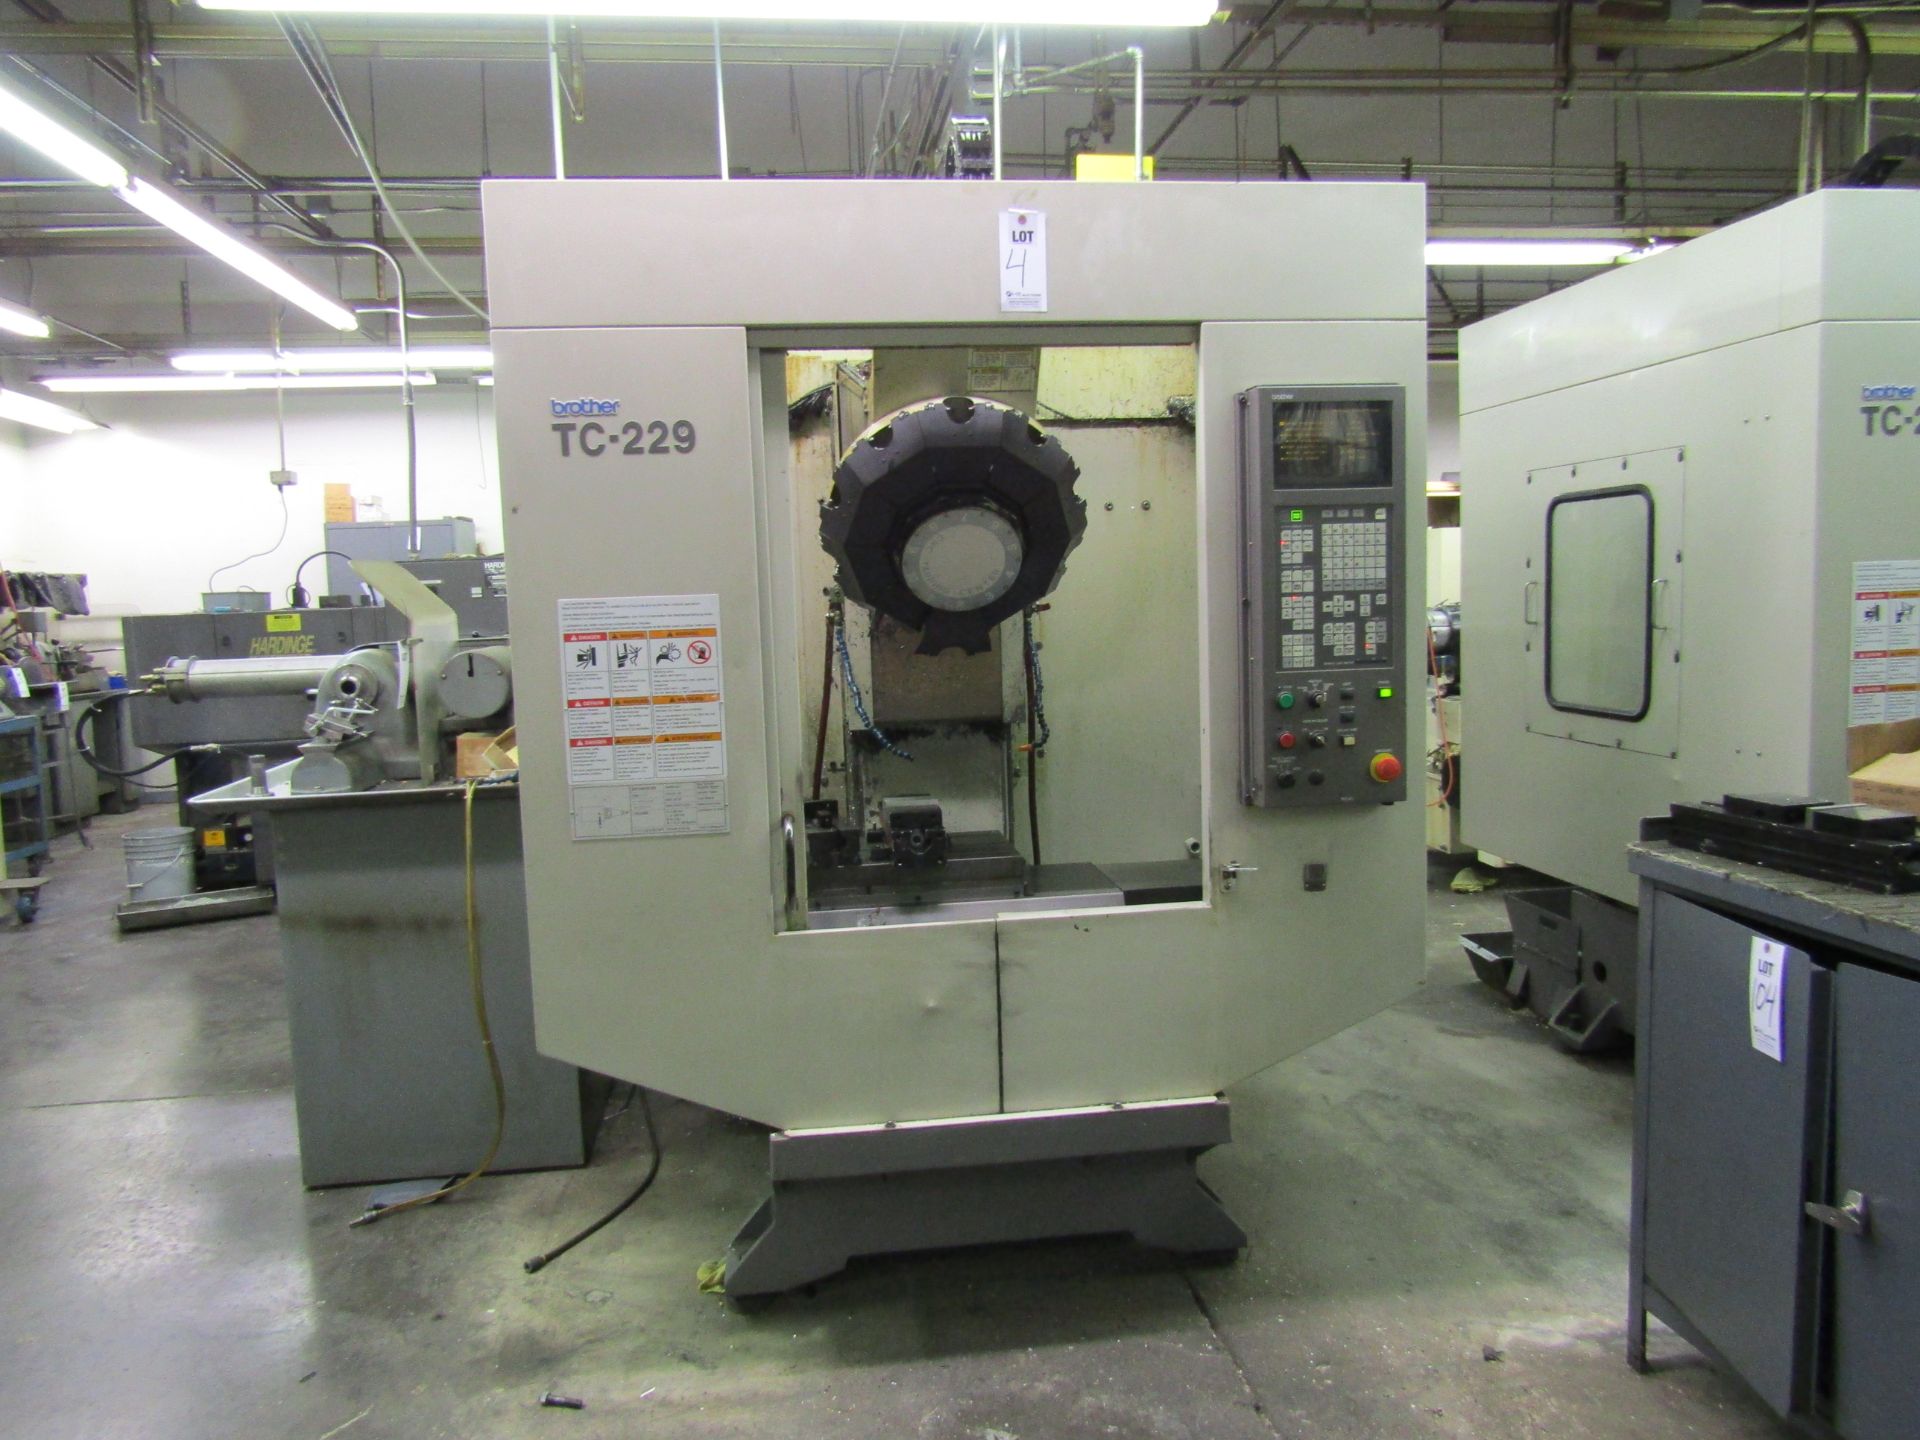 1996 BROTHER TC229 DRILL & TAPPING CNC CENTER, 10 TOOL ATC, TABLE SIZE 10"x24", BROTHER CNC CONTROL,